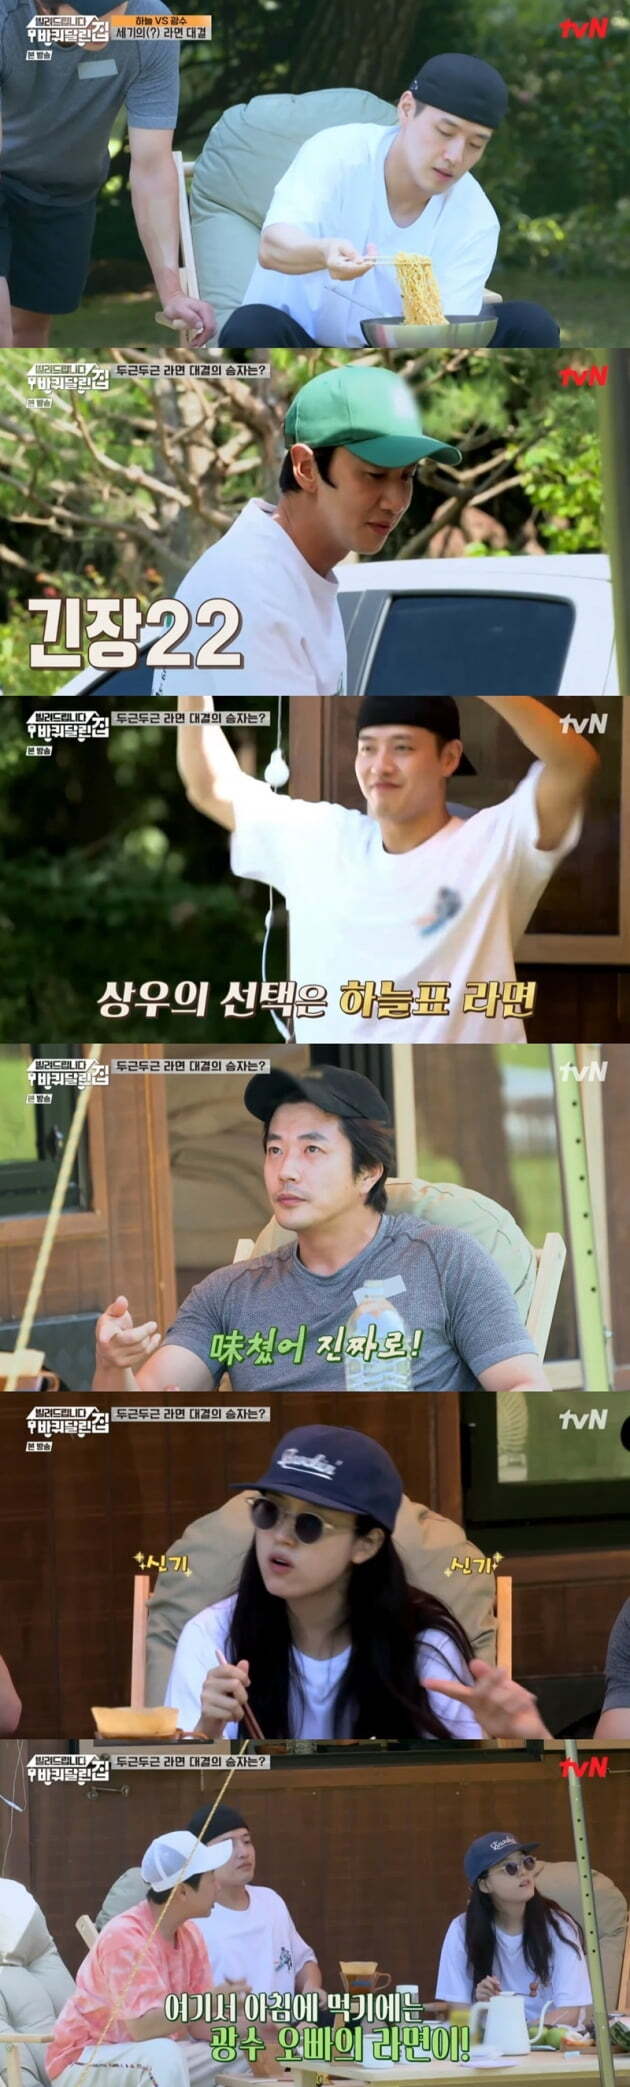 TVN I rent you a wheeled house did not miss healing and laughter until End.The House with Wheels aired on the 27th featured actors from the film Pirates: The Goblin Flag.On this day, the members gathered and talked ahead of the end of Wheels edit.When Kim Sung-oh farted, Lee Kwang-soo was surprised by the smell, saying, I think you should go to the bathroom and see it.Lee Kwang-soo said, I am right next to the window, but how can I do this? Kim Sung-oh said, There is a saying that it is thick and short. (The smell) doesnt go long, she quivered numbly.Han Hyo-joo, who saw this, enjoyed the comfortable atmosphere, saying, It is like cousins, farting and suddenly here.The members of Oh Soon-do gathered to express regret at the last night.Sehun suggested, Lets play a game, and Park Ji-hwan also said, Lets burn it with the last footwork.Kang Ha-neul said, I heard it was a wheeled house healing pro, but it is one night and two days atmosphere. I continue to game.Lee Kwang-soo also laughed, This is the third episode of Running Man: How many Game do you have?Eventually, the members had a good time playing the game of footwear, and then Park Ji-hwan delivered gifts for the members and continued the warm atmosphere.Park Ji-hwans gift was eight volumes of poetry and a letter written directly. The members were impressed by the letter recommended to read.The next morning, the members decided to eat Instant Noodle, so Han Hyo-joo hesitated and Lee Kwang-soo confessed that he had in fact bought seaweed soup ingredients yesterday.As it turns out, I prepared a surprise seaweed soup for Kwon Sang-woo, who celebrated his birthday.Lee Kwang-soo suggested: Ill boil two, Kang Ha-neul three, Ill do the seaweed soup Instant Noodle.Lets say Kwon Sang-woo doesnt seem like that, Lee Kwang-soo suggested a stand-up showdown with Kang Ha-neul to boil the Instant Noodle.Kang Ha-neul said, Ill cook inside, and Lee Kwang-soo started a nervous battle, saying, So Im supposed to do it in the sun?Lee Kwang-soo checked, Do not listen to the people around you, but you have to boil in your style.But Lee Kwang-soo laughed at the Instant Noodle as Han Hyo-joo led.Lee Kwang-soo created a seaweed instant noodle filled with seaweed in the Instant Noodle.Im sorry for this food to be called an Instant Noodle, he said, raising his dish.Kang Ha-neul held onto the orthodox Instant Noodle and played the showdown.Kwon Sang-woo said meaningfully after tasting, I just set it, he said, both are really delicious, the sky is delicious for the Instant Noodle.Han Hyo-joo said: The taste is sky is excellent in the Instant Noodle.But it is good to have bean sprouts and seaweed in the morning, and Kim Ki-doo also raised his hand to Lee Kwang-soos seaweed instant noodle and Lee Kwang-soo won.